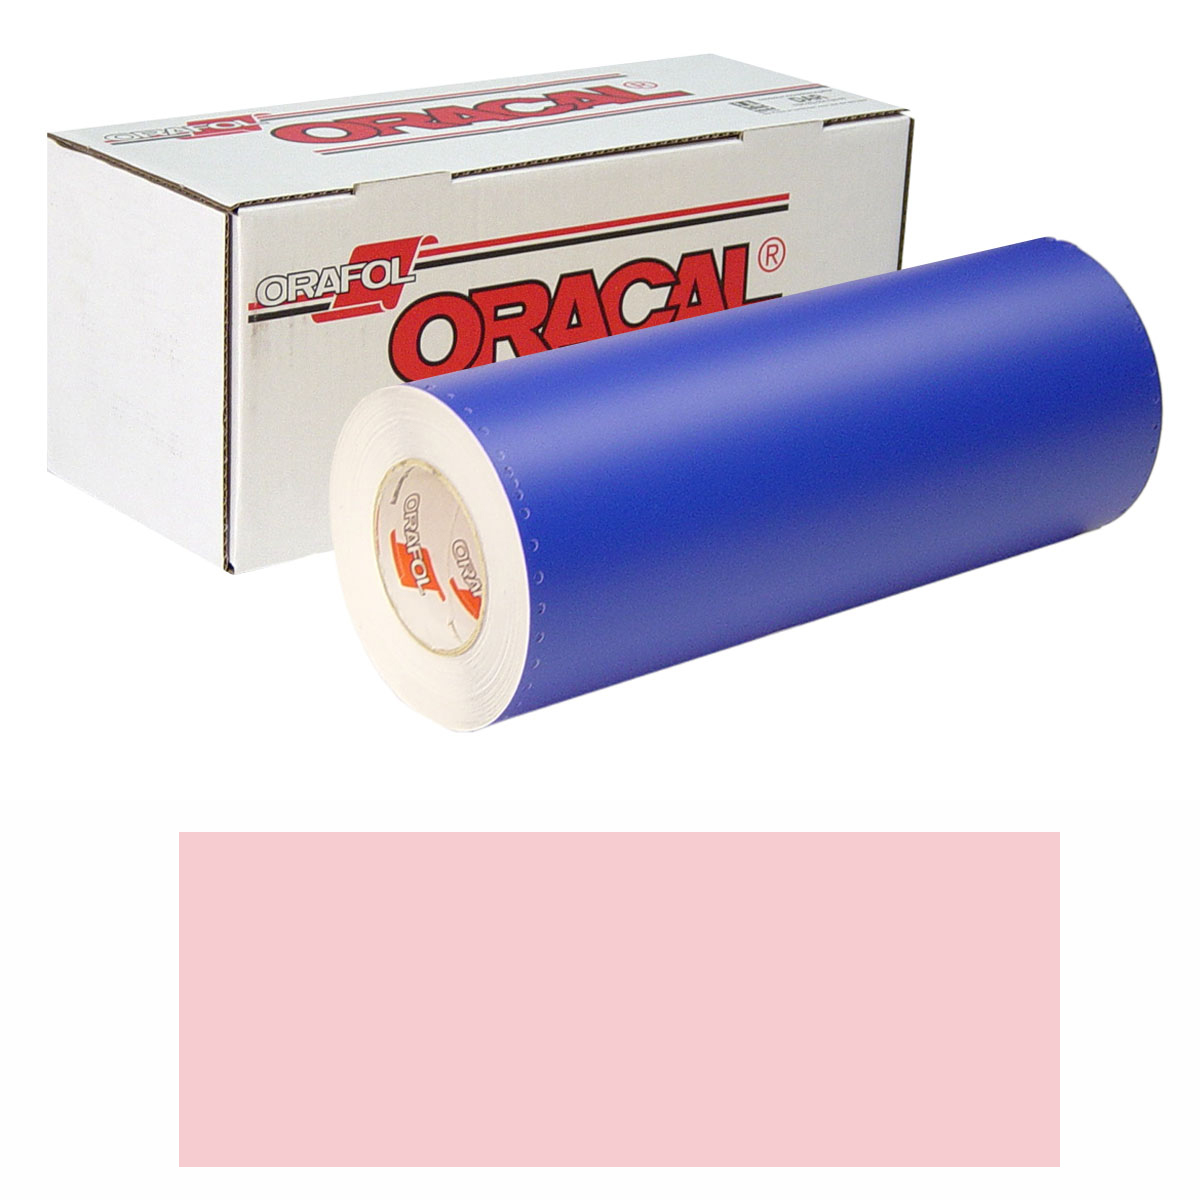 ORACAL 8300 15in X 10yd 085 Pale-Pink